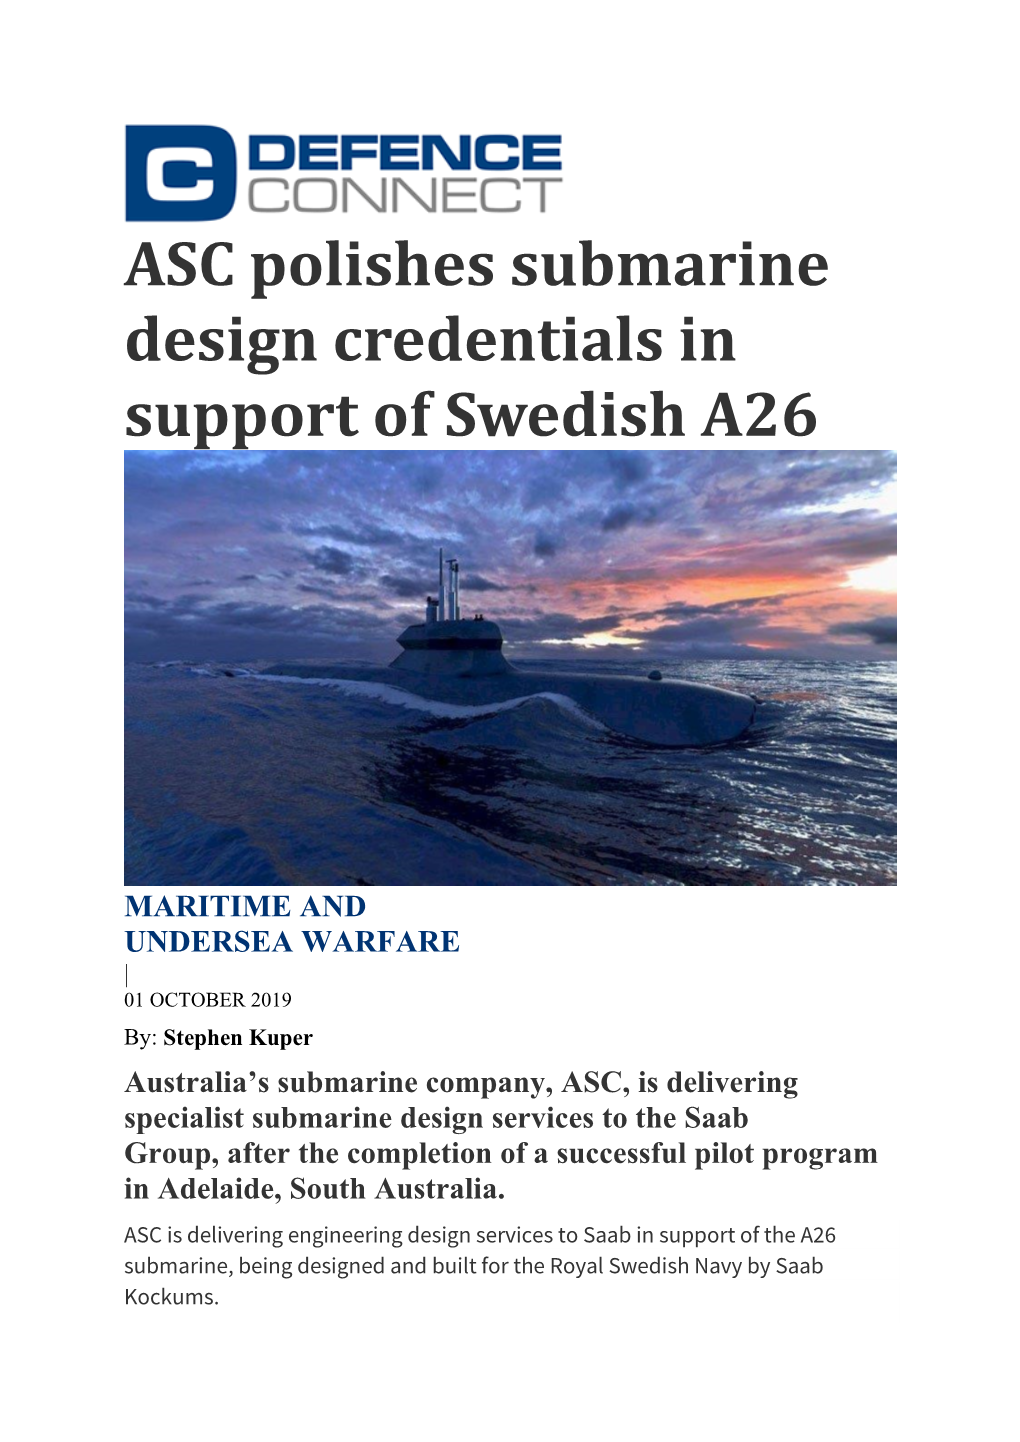 ASC Polishes Submarine Design Credentials in Support of Swedish A26